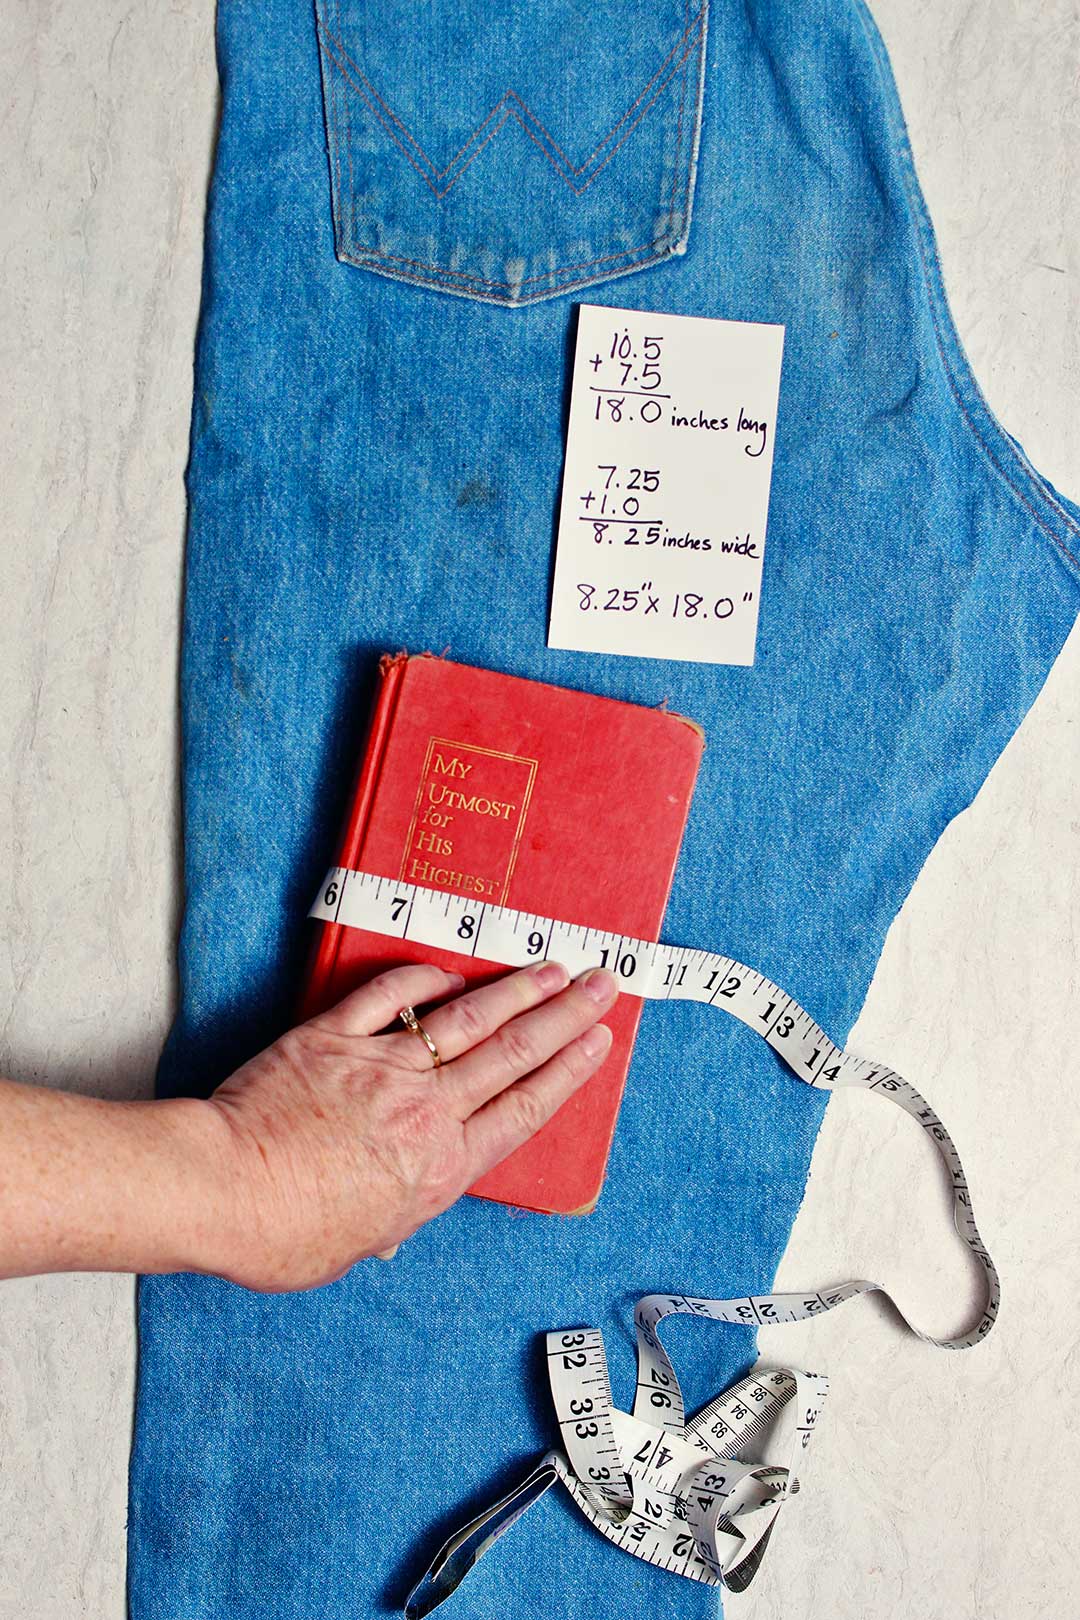 A hand measuring a book to see how much fabric will be needed. An index card showing measurements lays above it on a pair of old jeans.